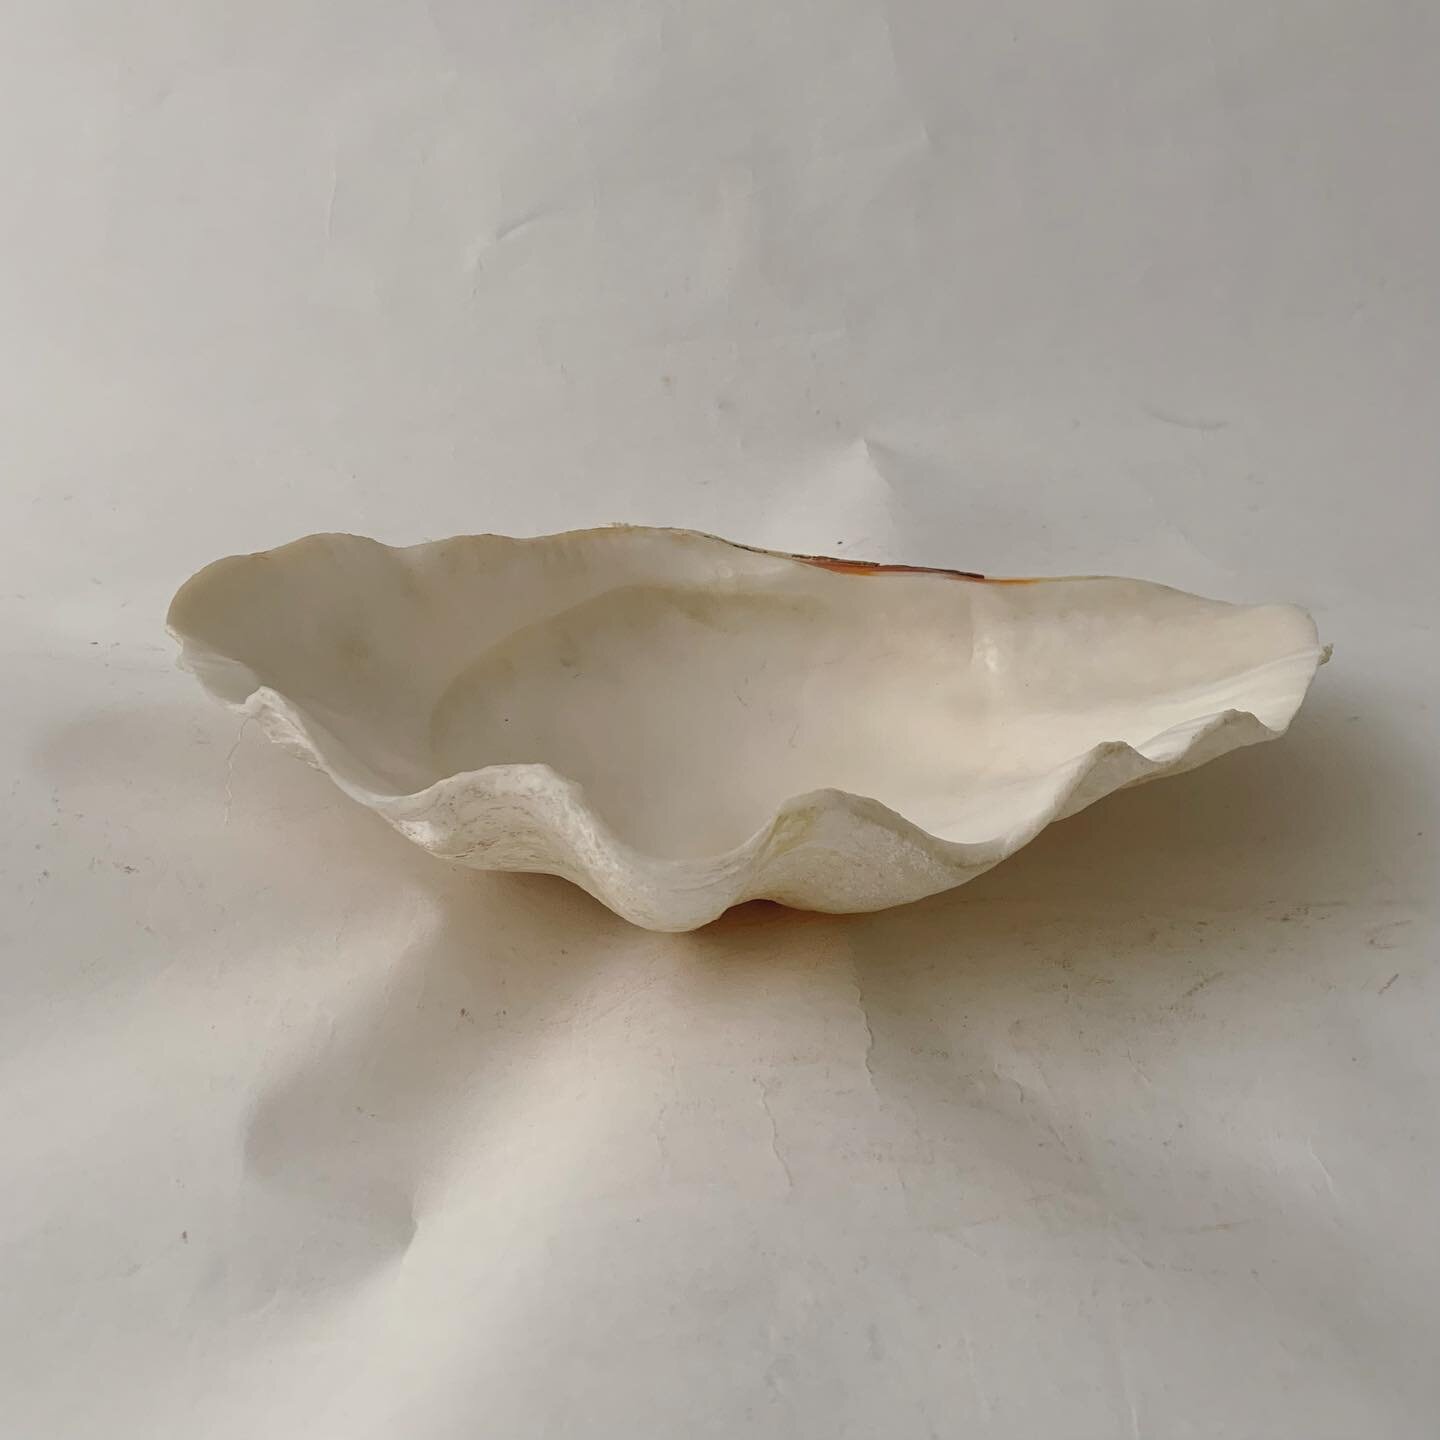 For all the clams, a good size catch all, soap dish, bowl 13x9x4&rdquo;H $89.00 #citycountrycottage #interiors #dmforinq